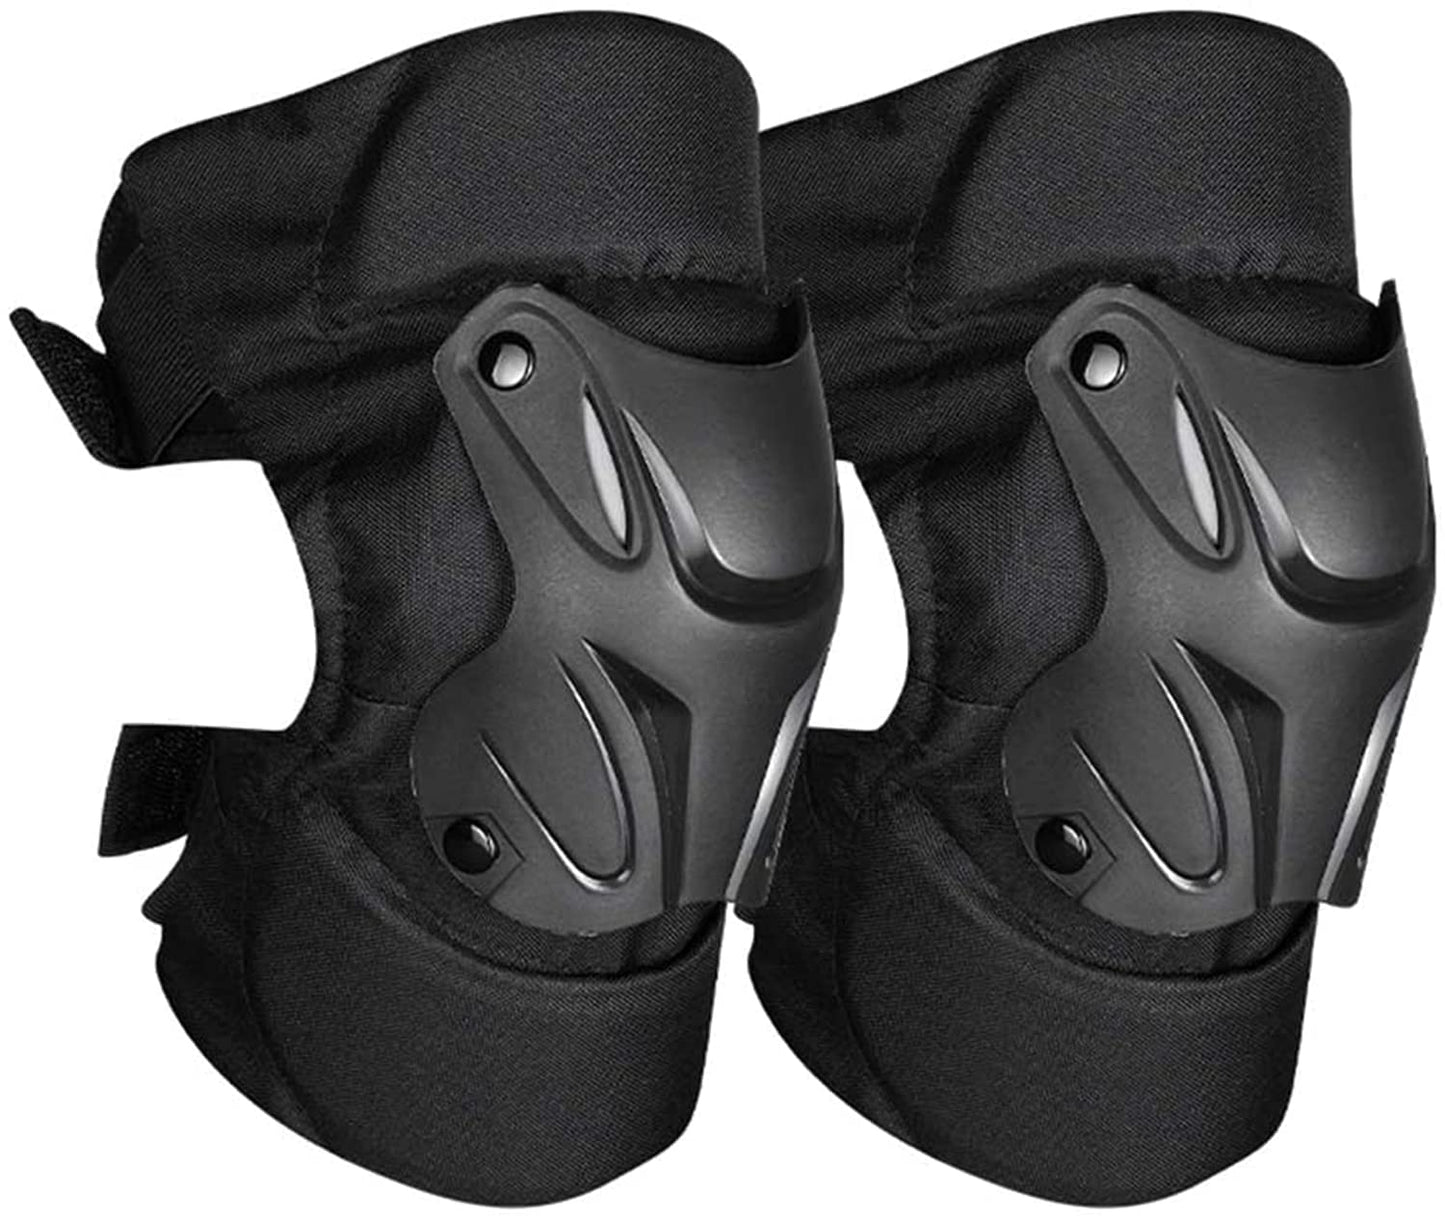 Knee Pads, Adult Adjustable Knee Cap Pads Cycling Knee Brace and Elbow Guards, Protector for Bike Motorcycle Cycling Racing Outdoor Active Knee Protector Gear (1 Pair - Black)